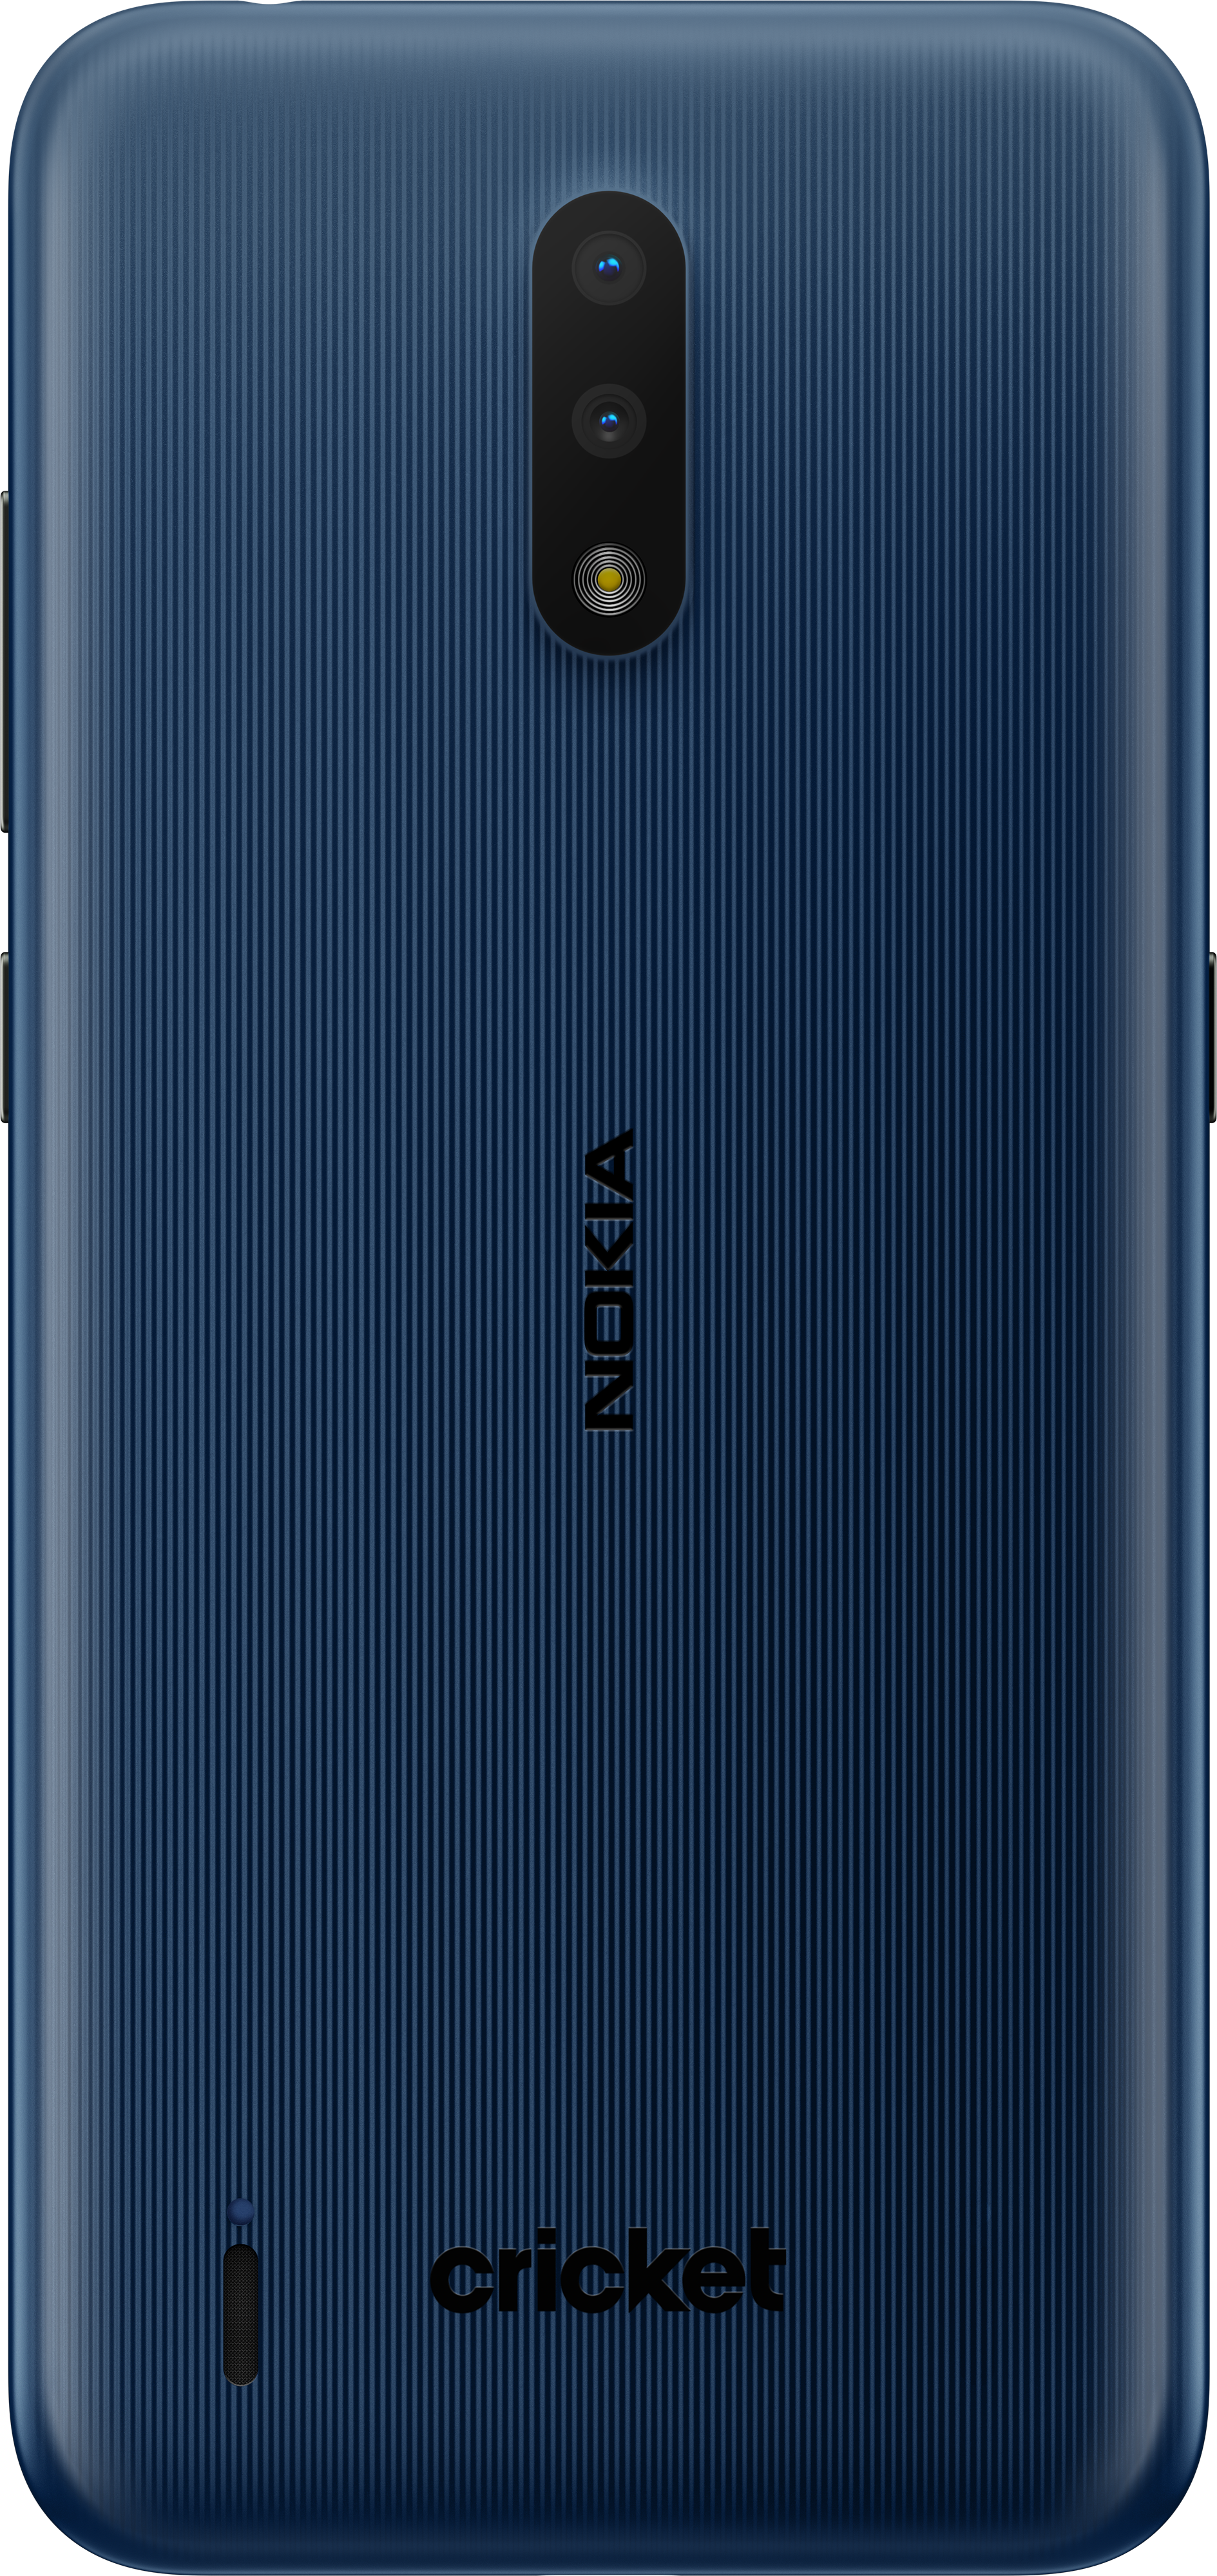 Nokia Smartphones With Android Android 10